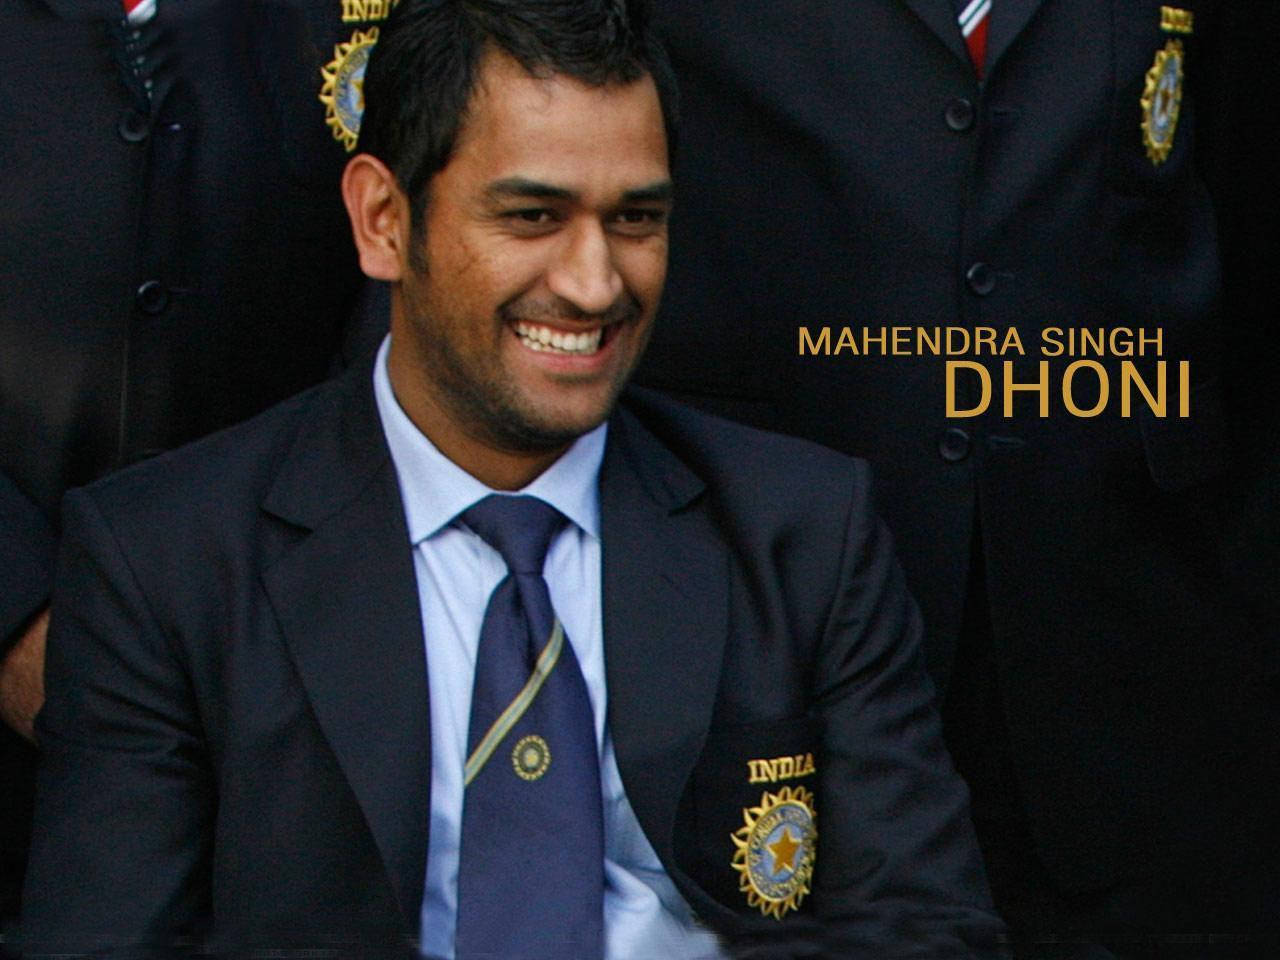 Ms Dhoni In Black Suit Background